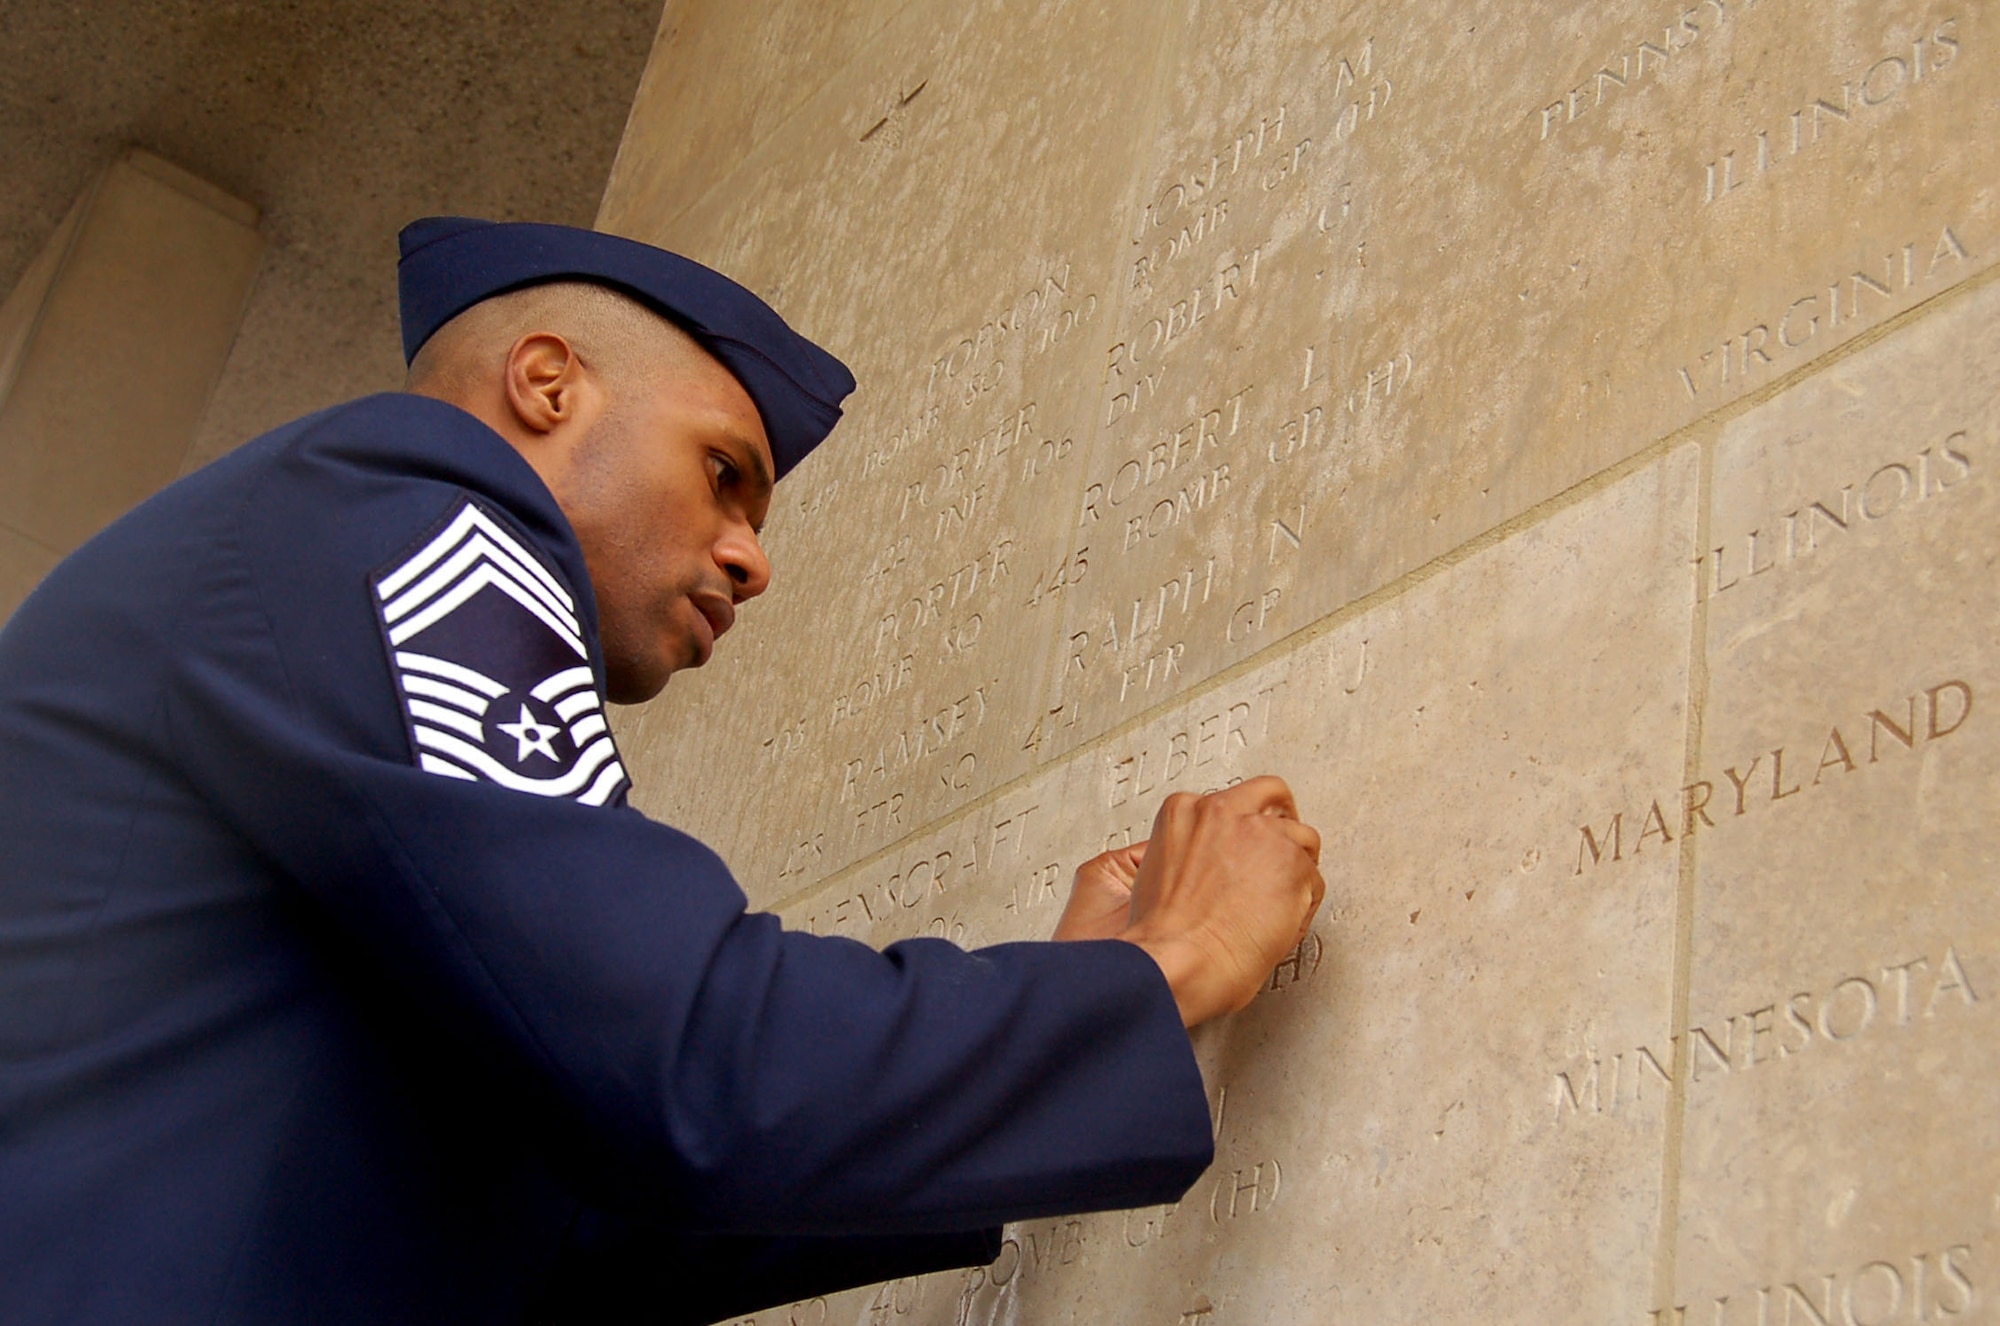 HENRI-CHAPELLE, Belgium -- Chief Master Sgt. Kenneth Williams, U.S. Air Force senior enlisted leaser for Supreme Headquarters Allied Powers Europe, places a rosette next to Tech. Sgt. Leonard J. Ray's engraved name Feb. 20, 2009 at the Henri-Chapelle Cemetery and Memorial in Belgium, signifying he is no longer missing in action. Sergeant Ray was part of the McMurray Crew in the Army Air Corps, which flew a B-24 bomber during World War II. (U.S. Air Force photo by 2nd Lt. Kathleen Polesnak)